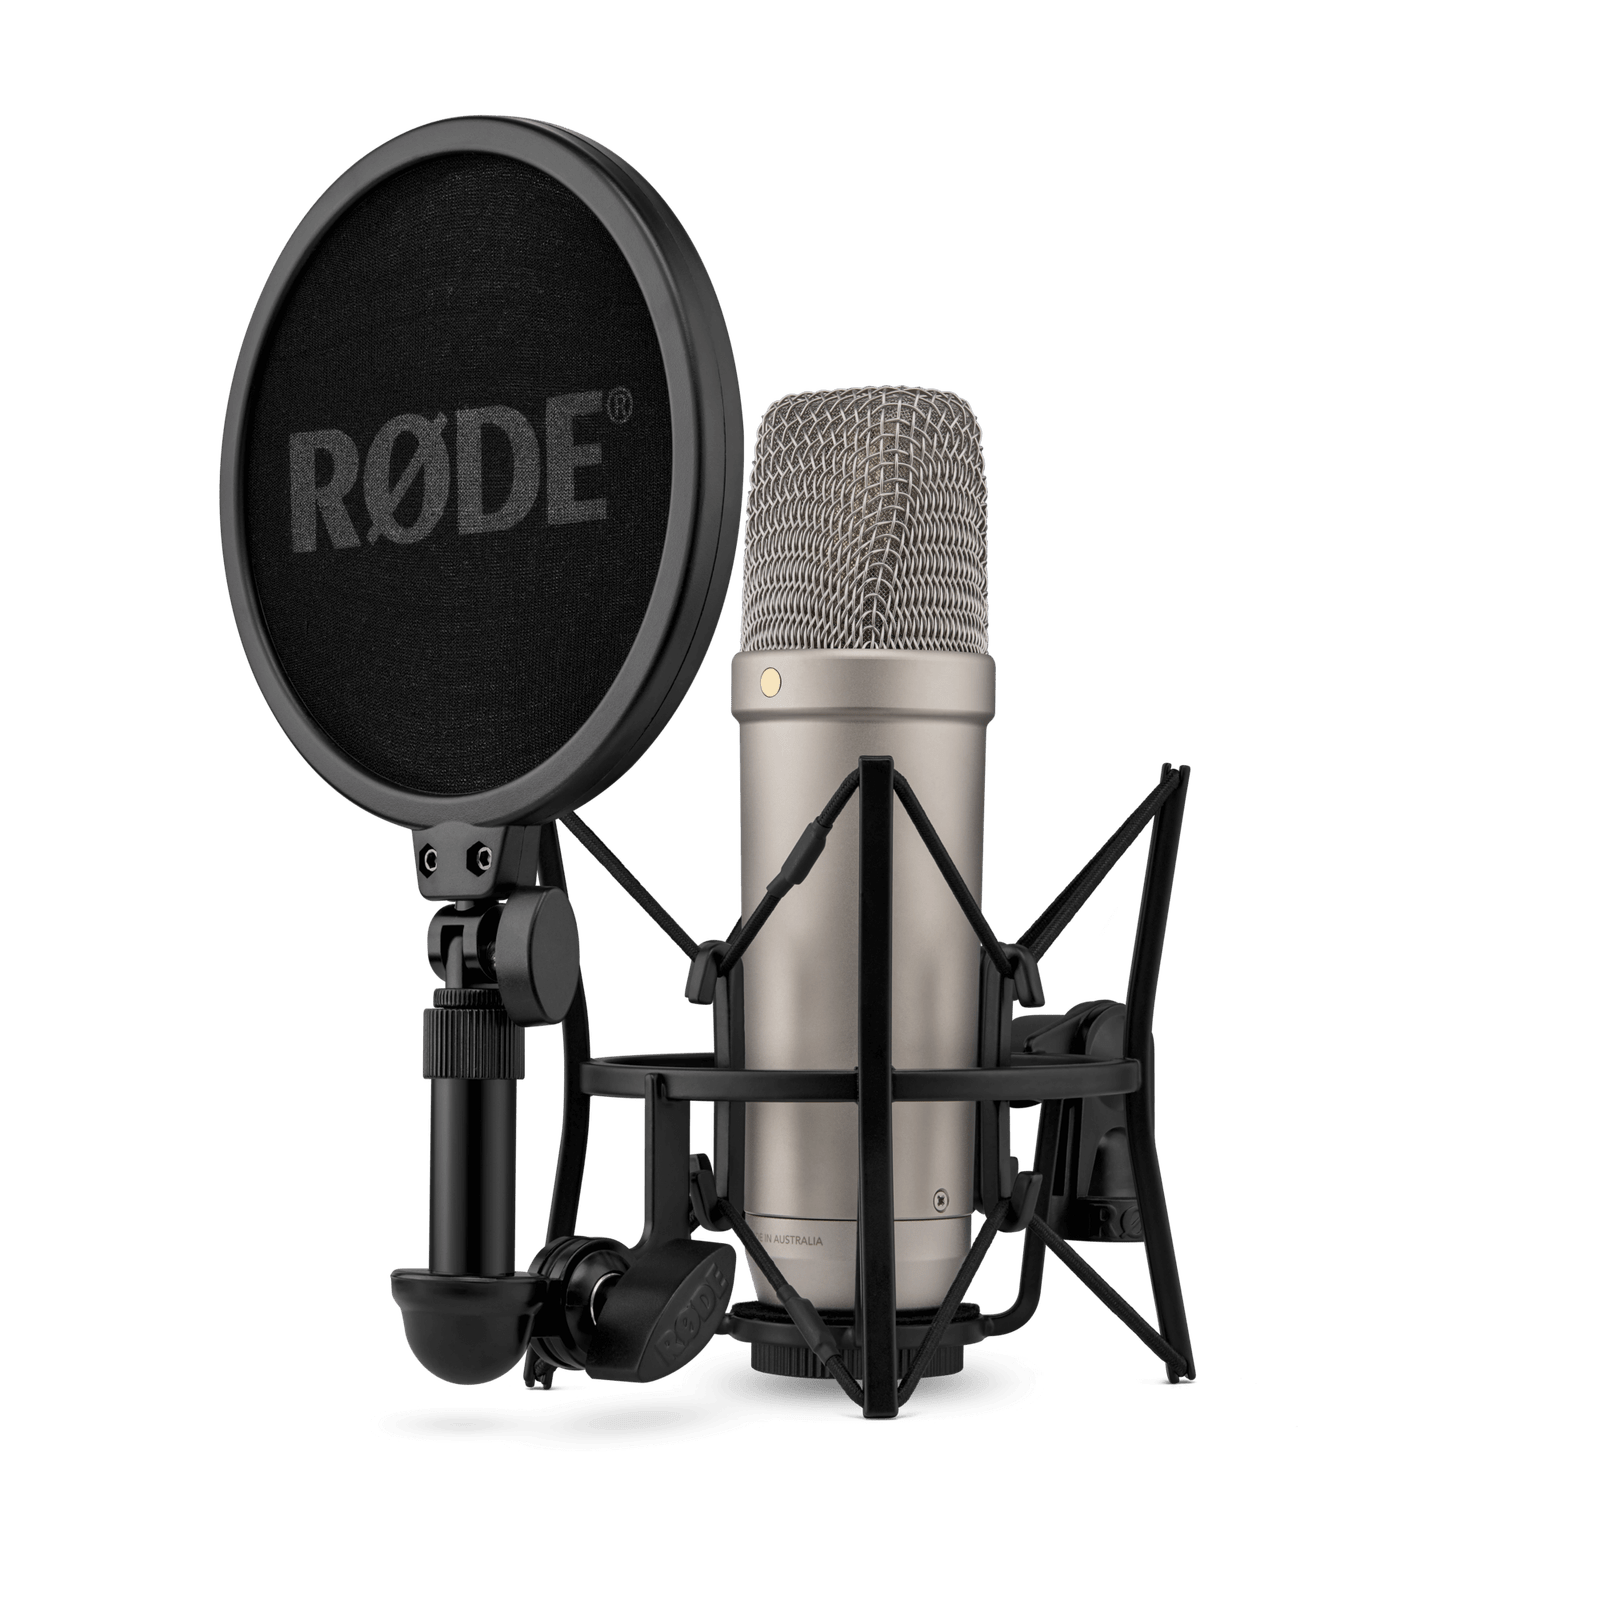 Buy Rode PodMic Podcasting Microphone Online Buy in India